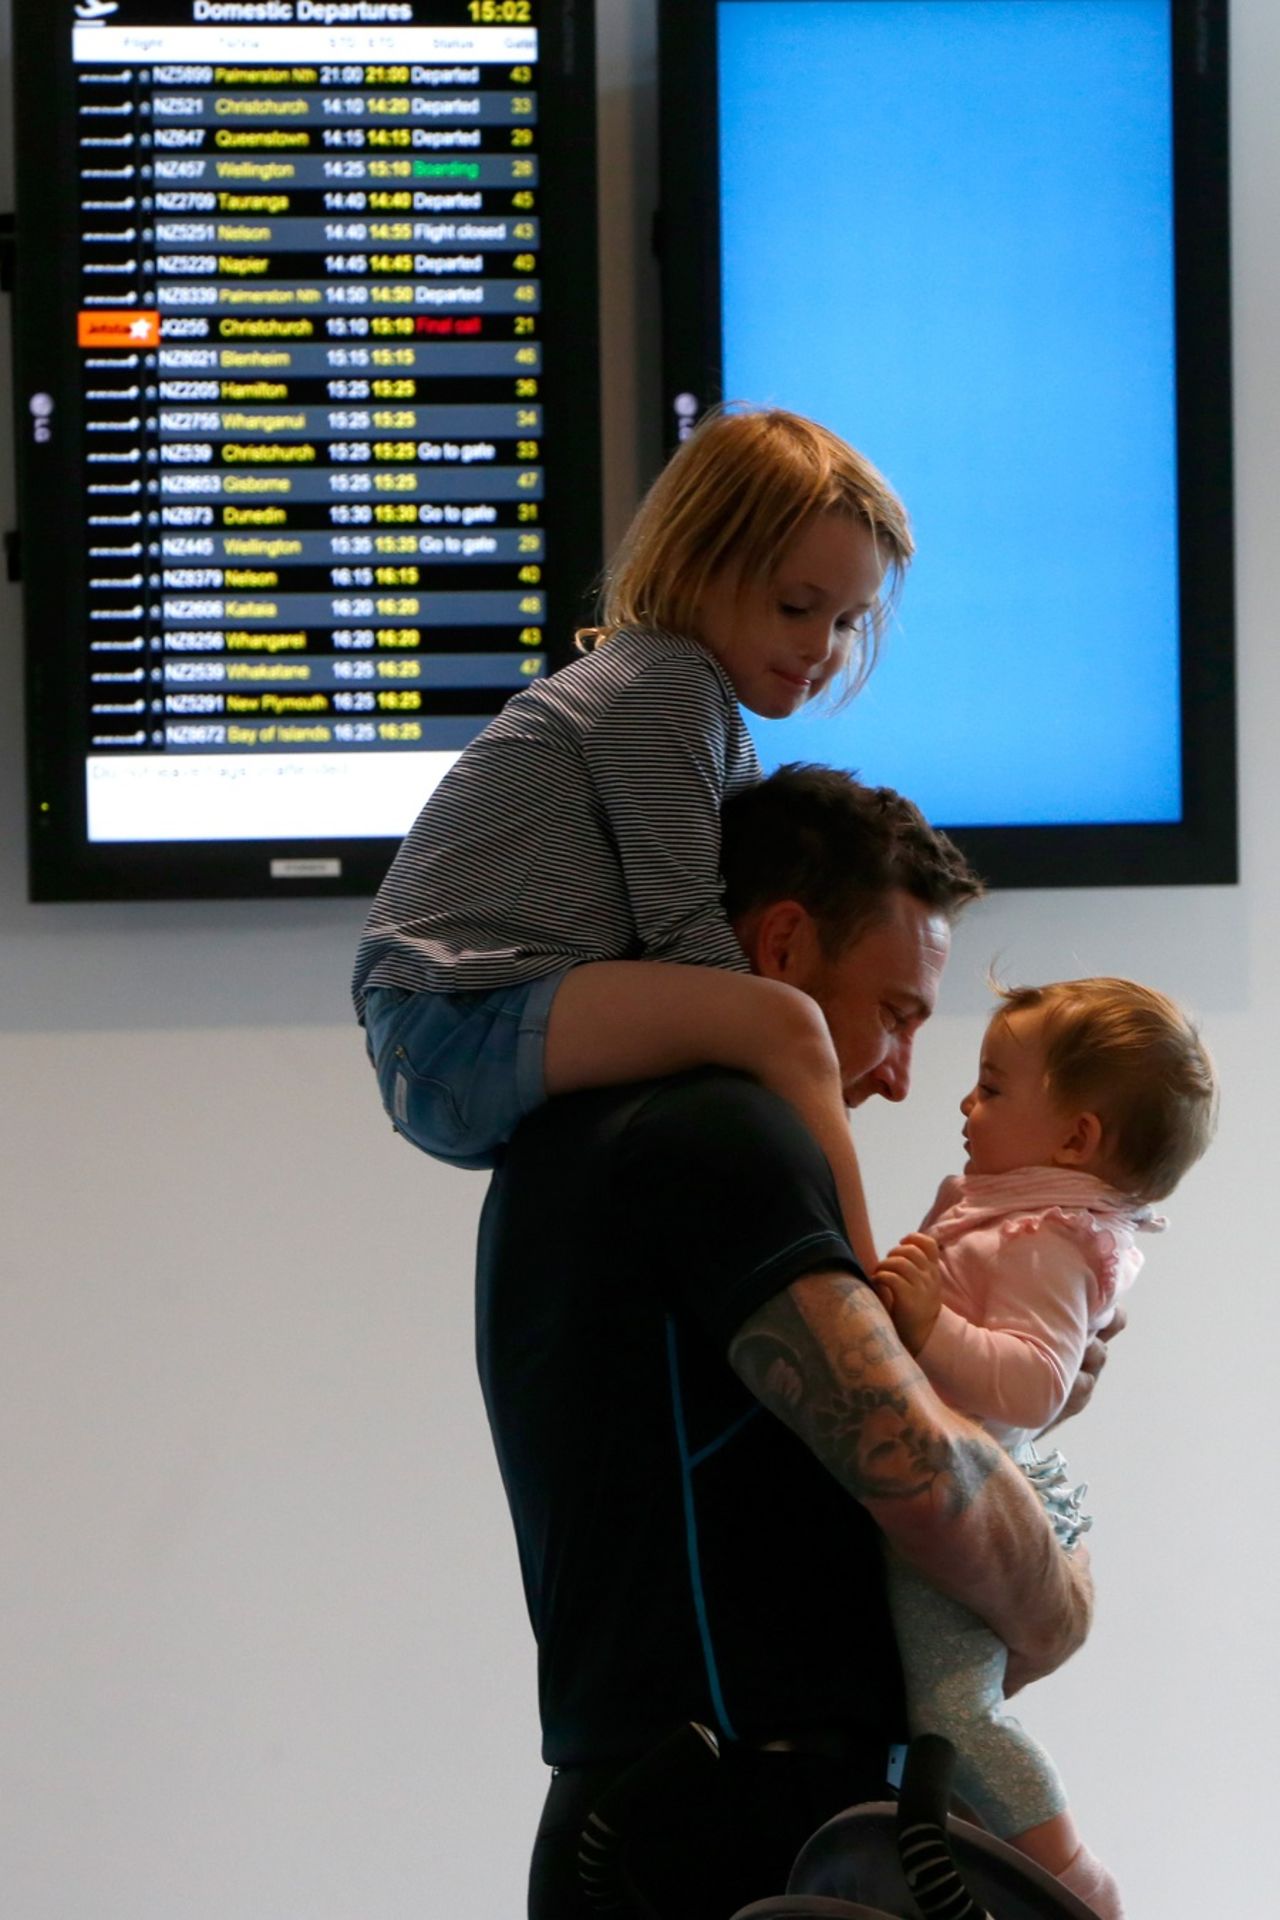 Hero's welcome: Brendon McCullum with his daughters, Auckland, January 31, 2015